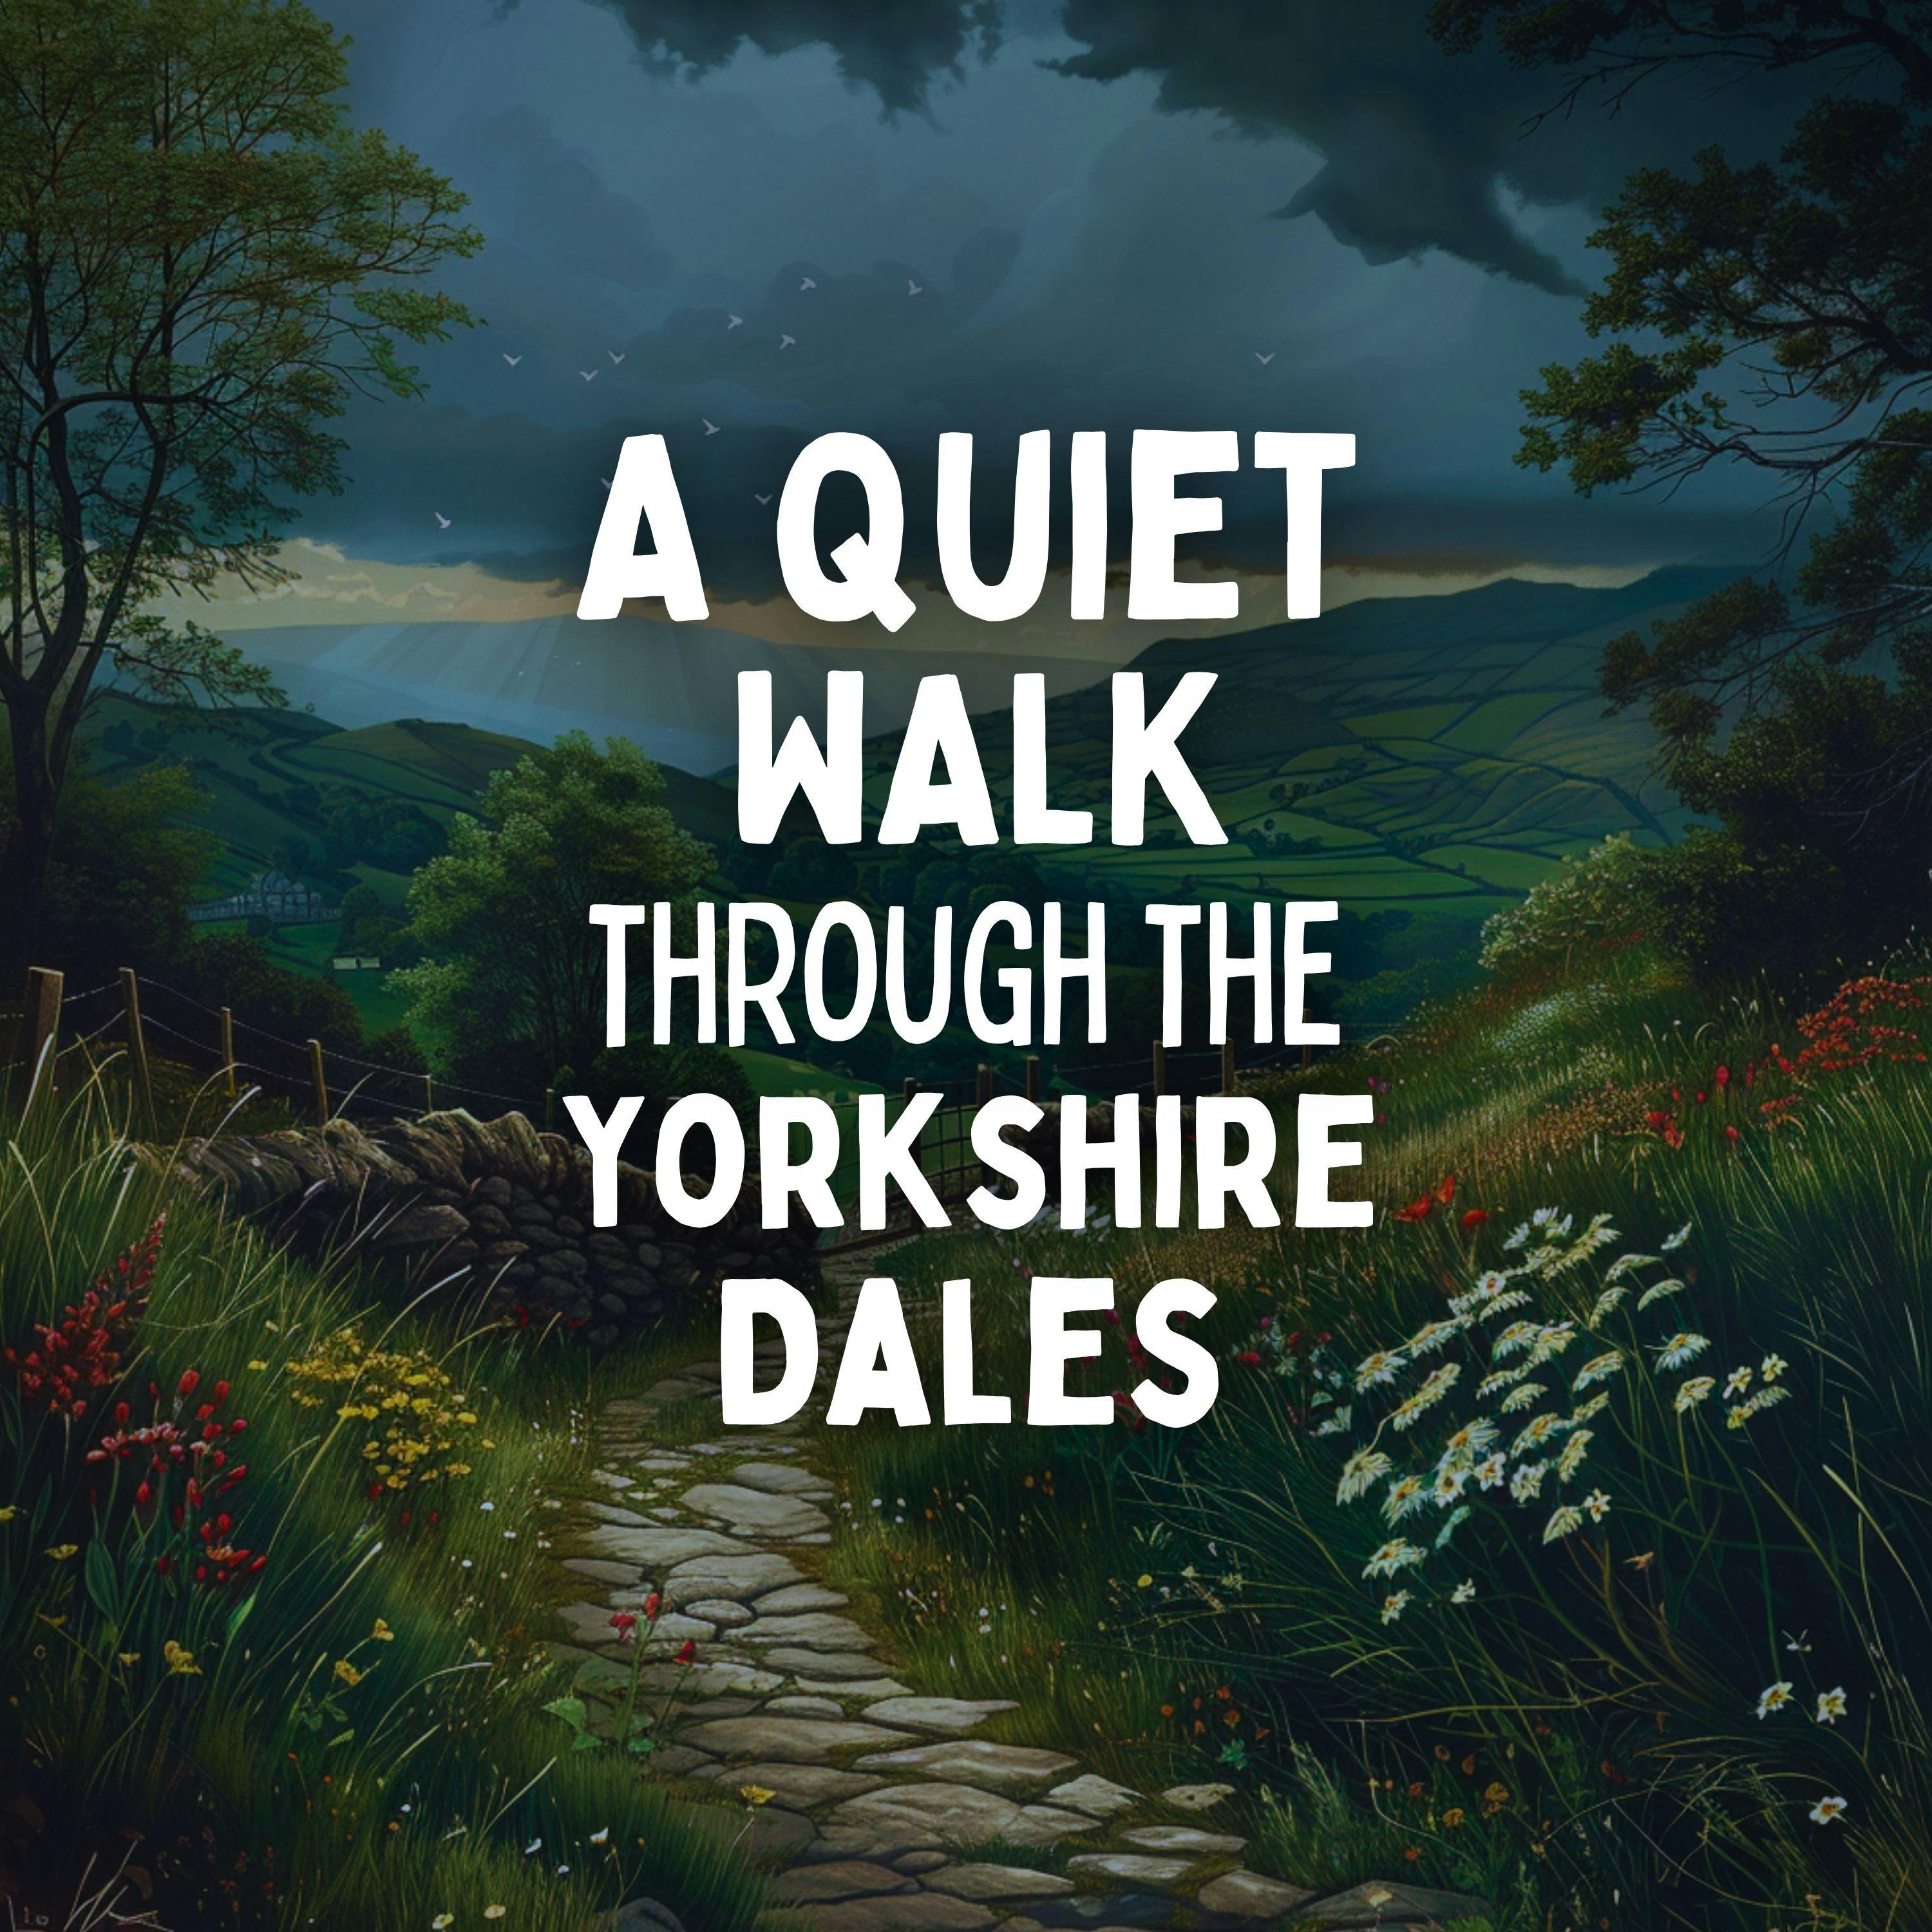 A Quiet Walk through the Yorkshire Dales